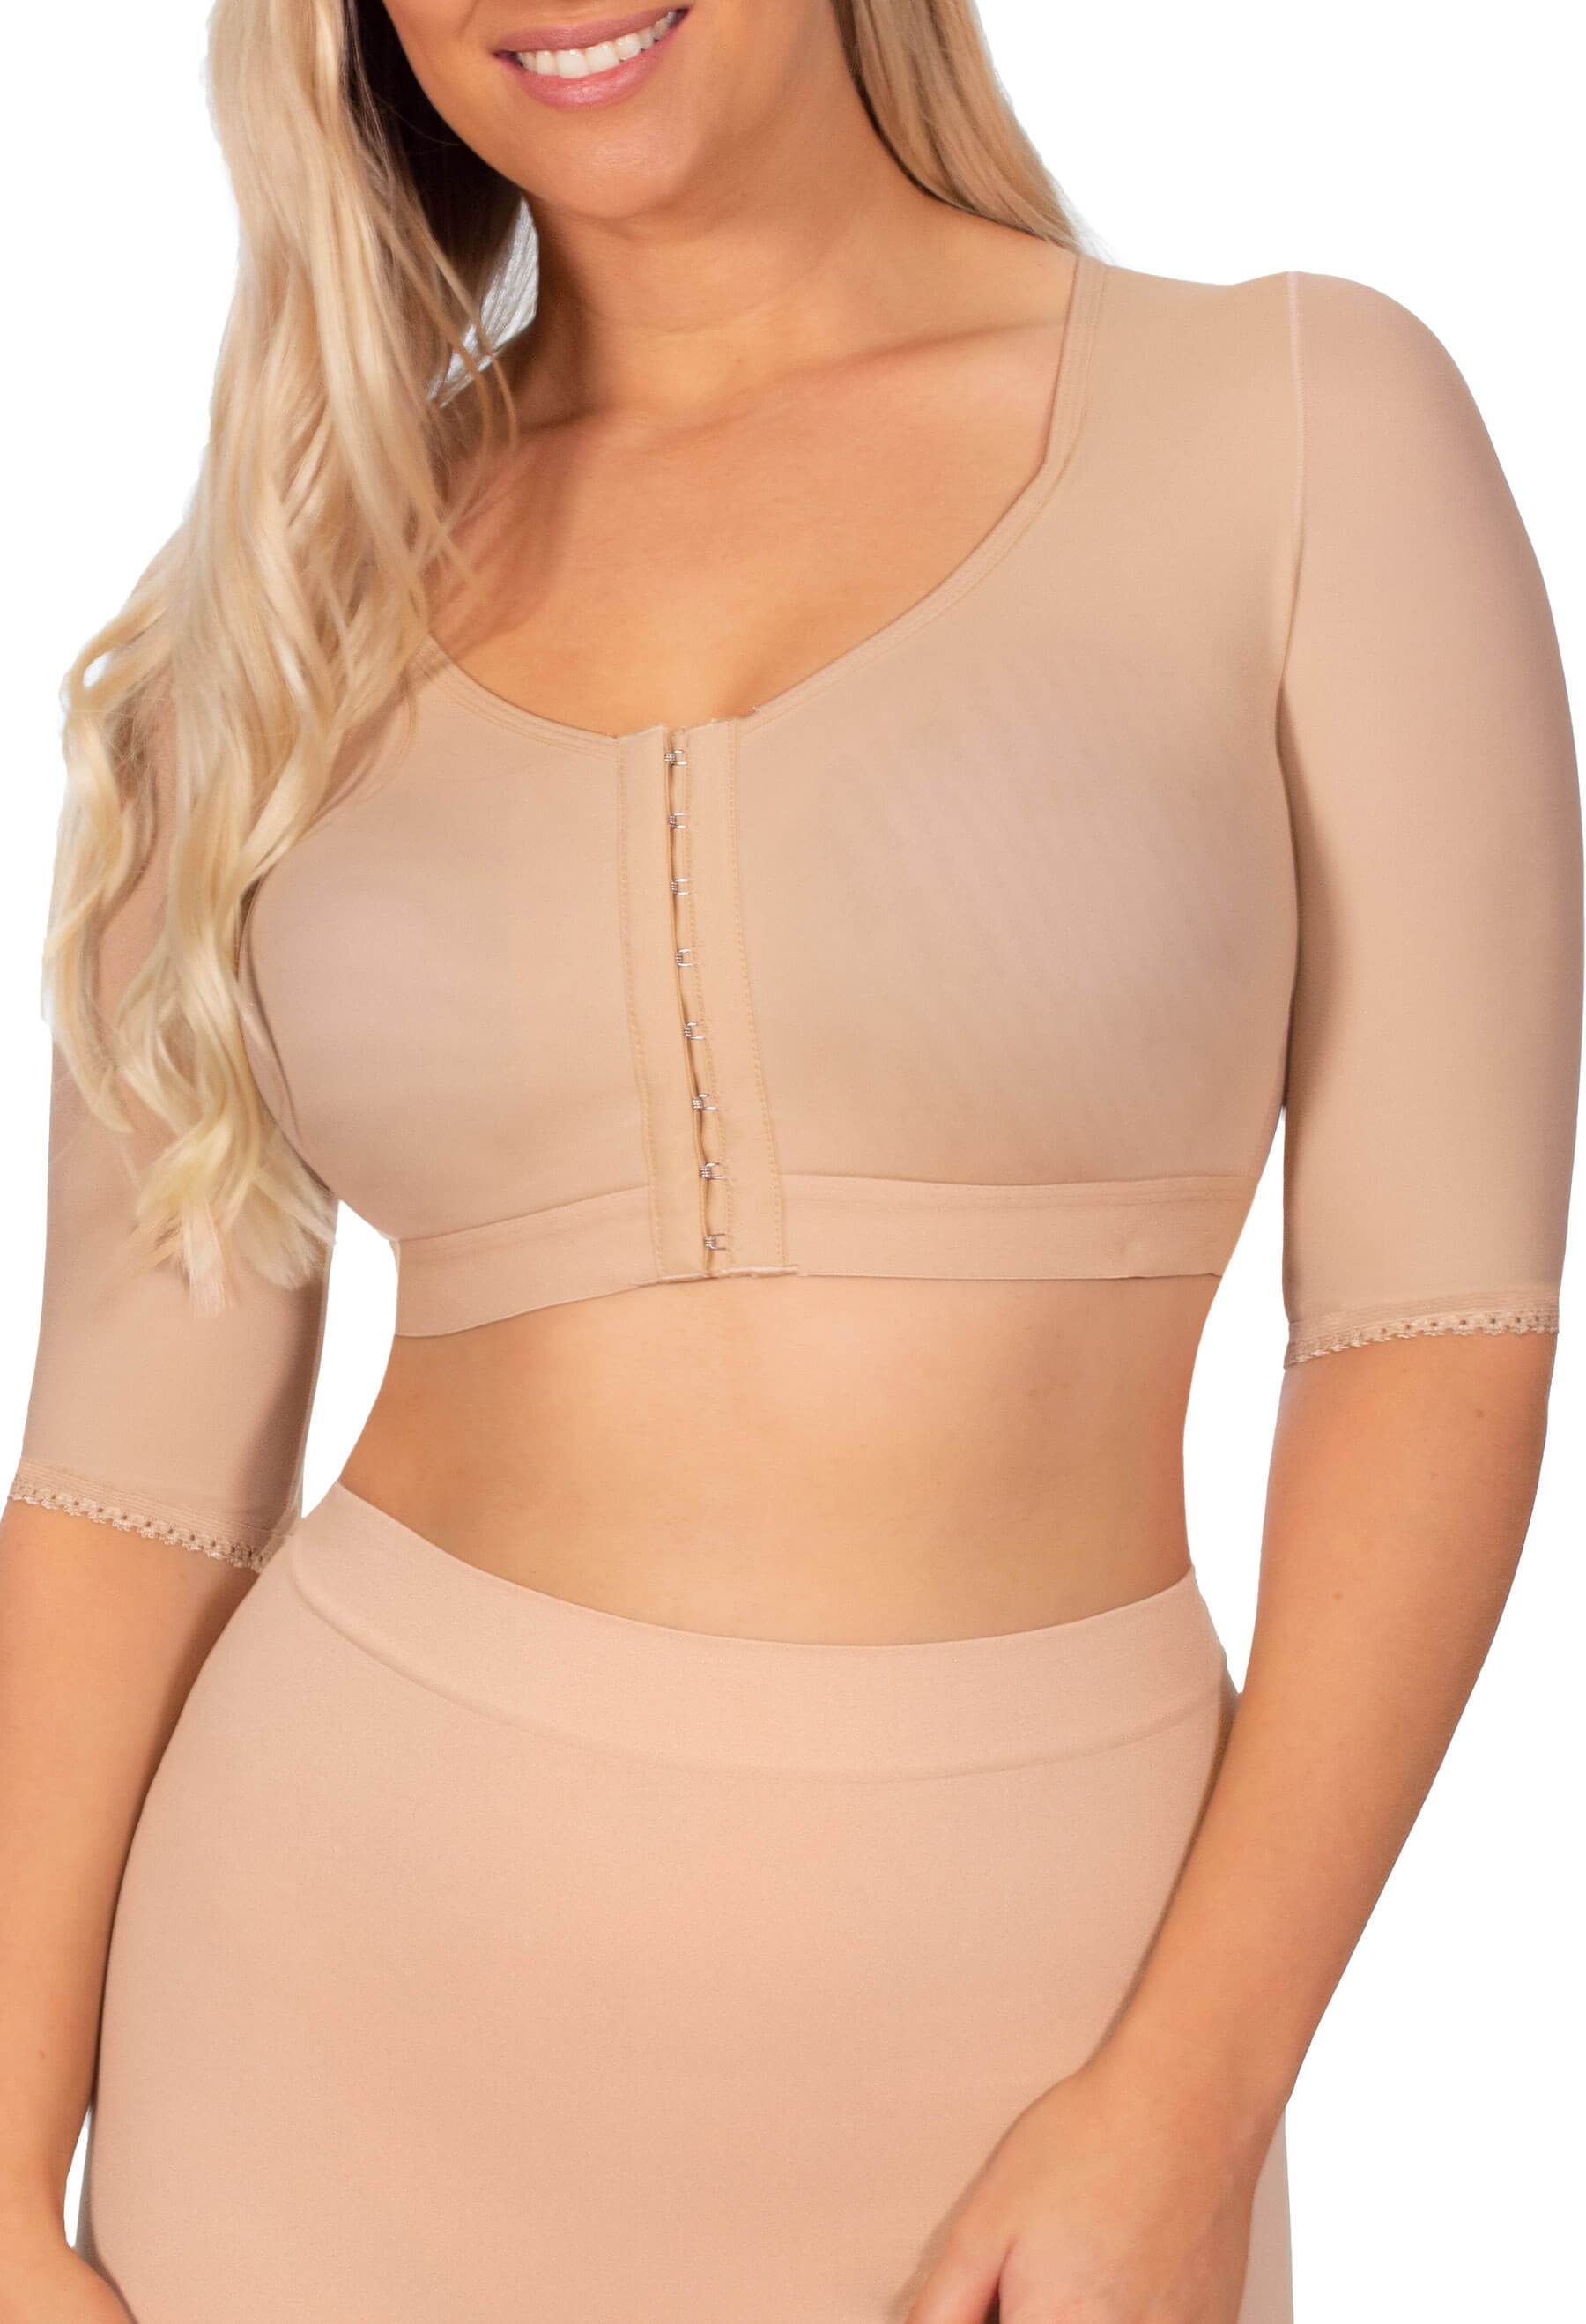 Nursing Top With Shapewear White Xlarge, Shop Today. Get it Tomorrow!